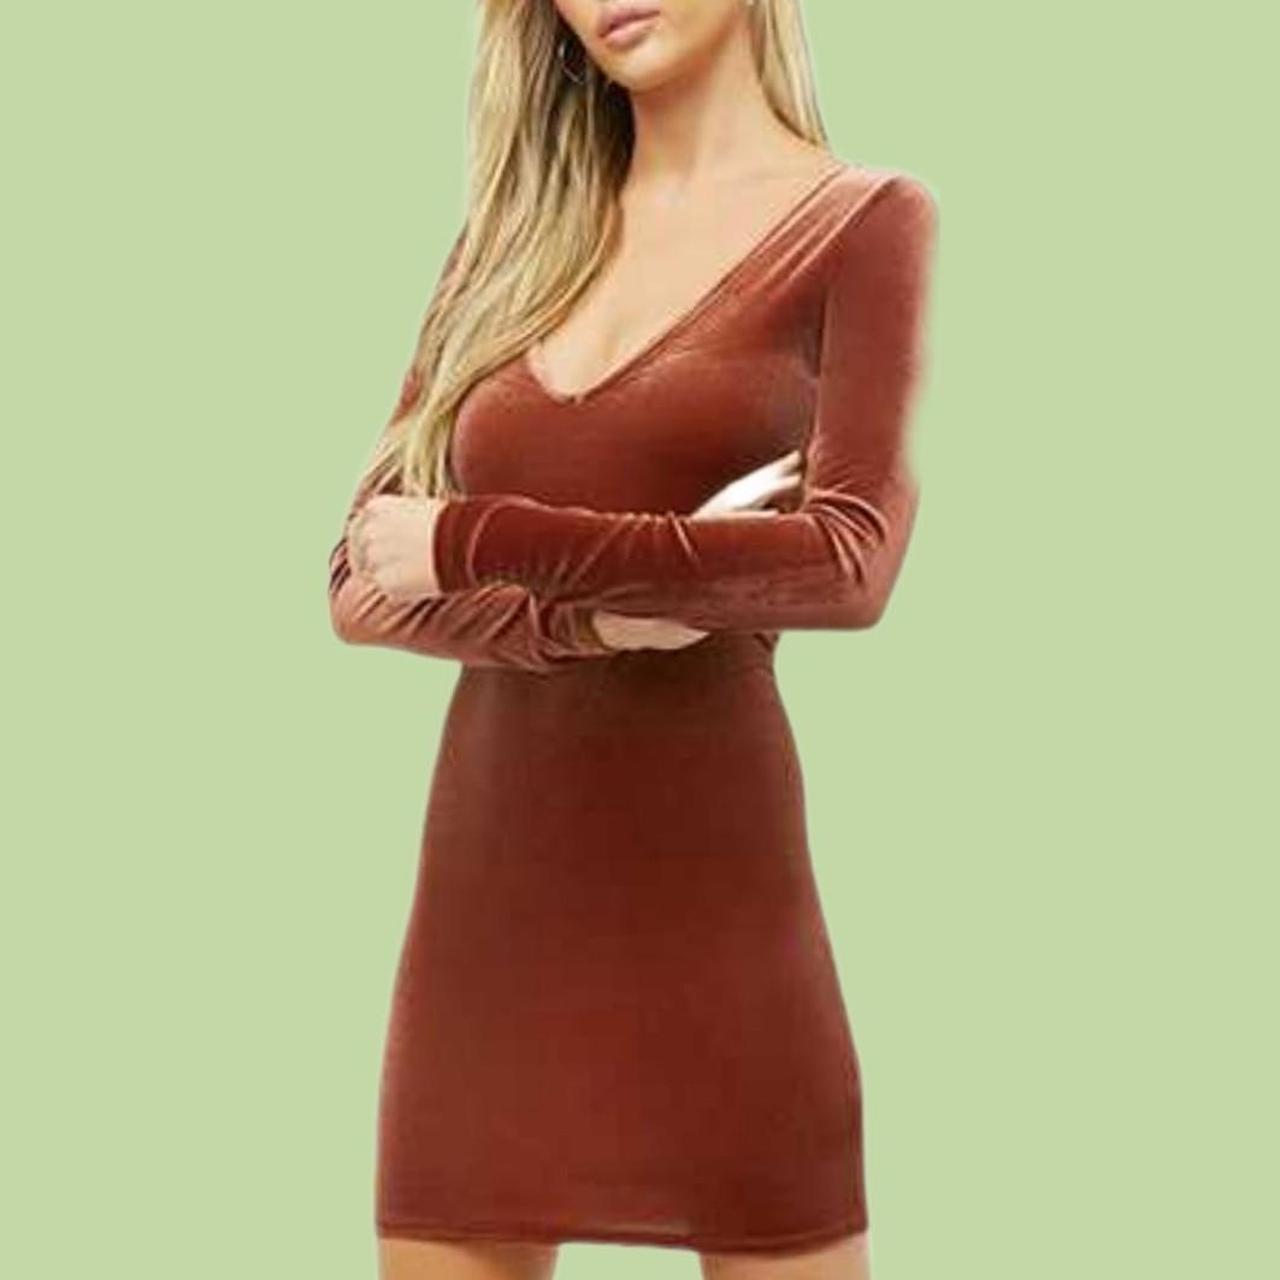 Forever 21 Off The Shoulder Bodycon Dress, $27 | Forever 21 | Lookastic